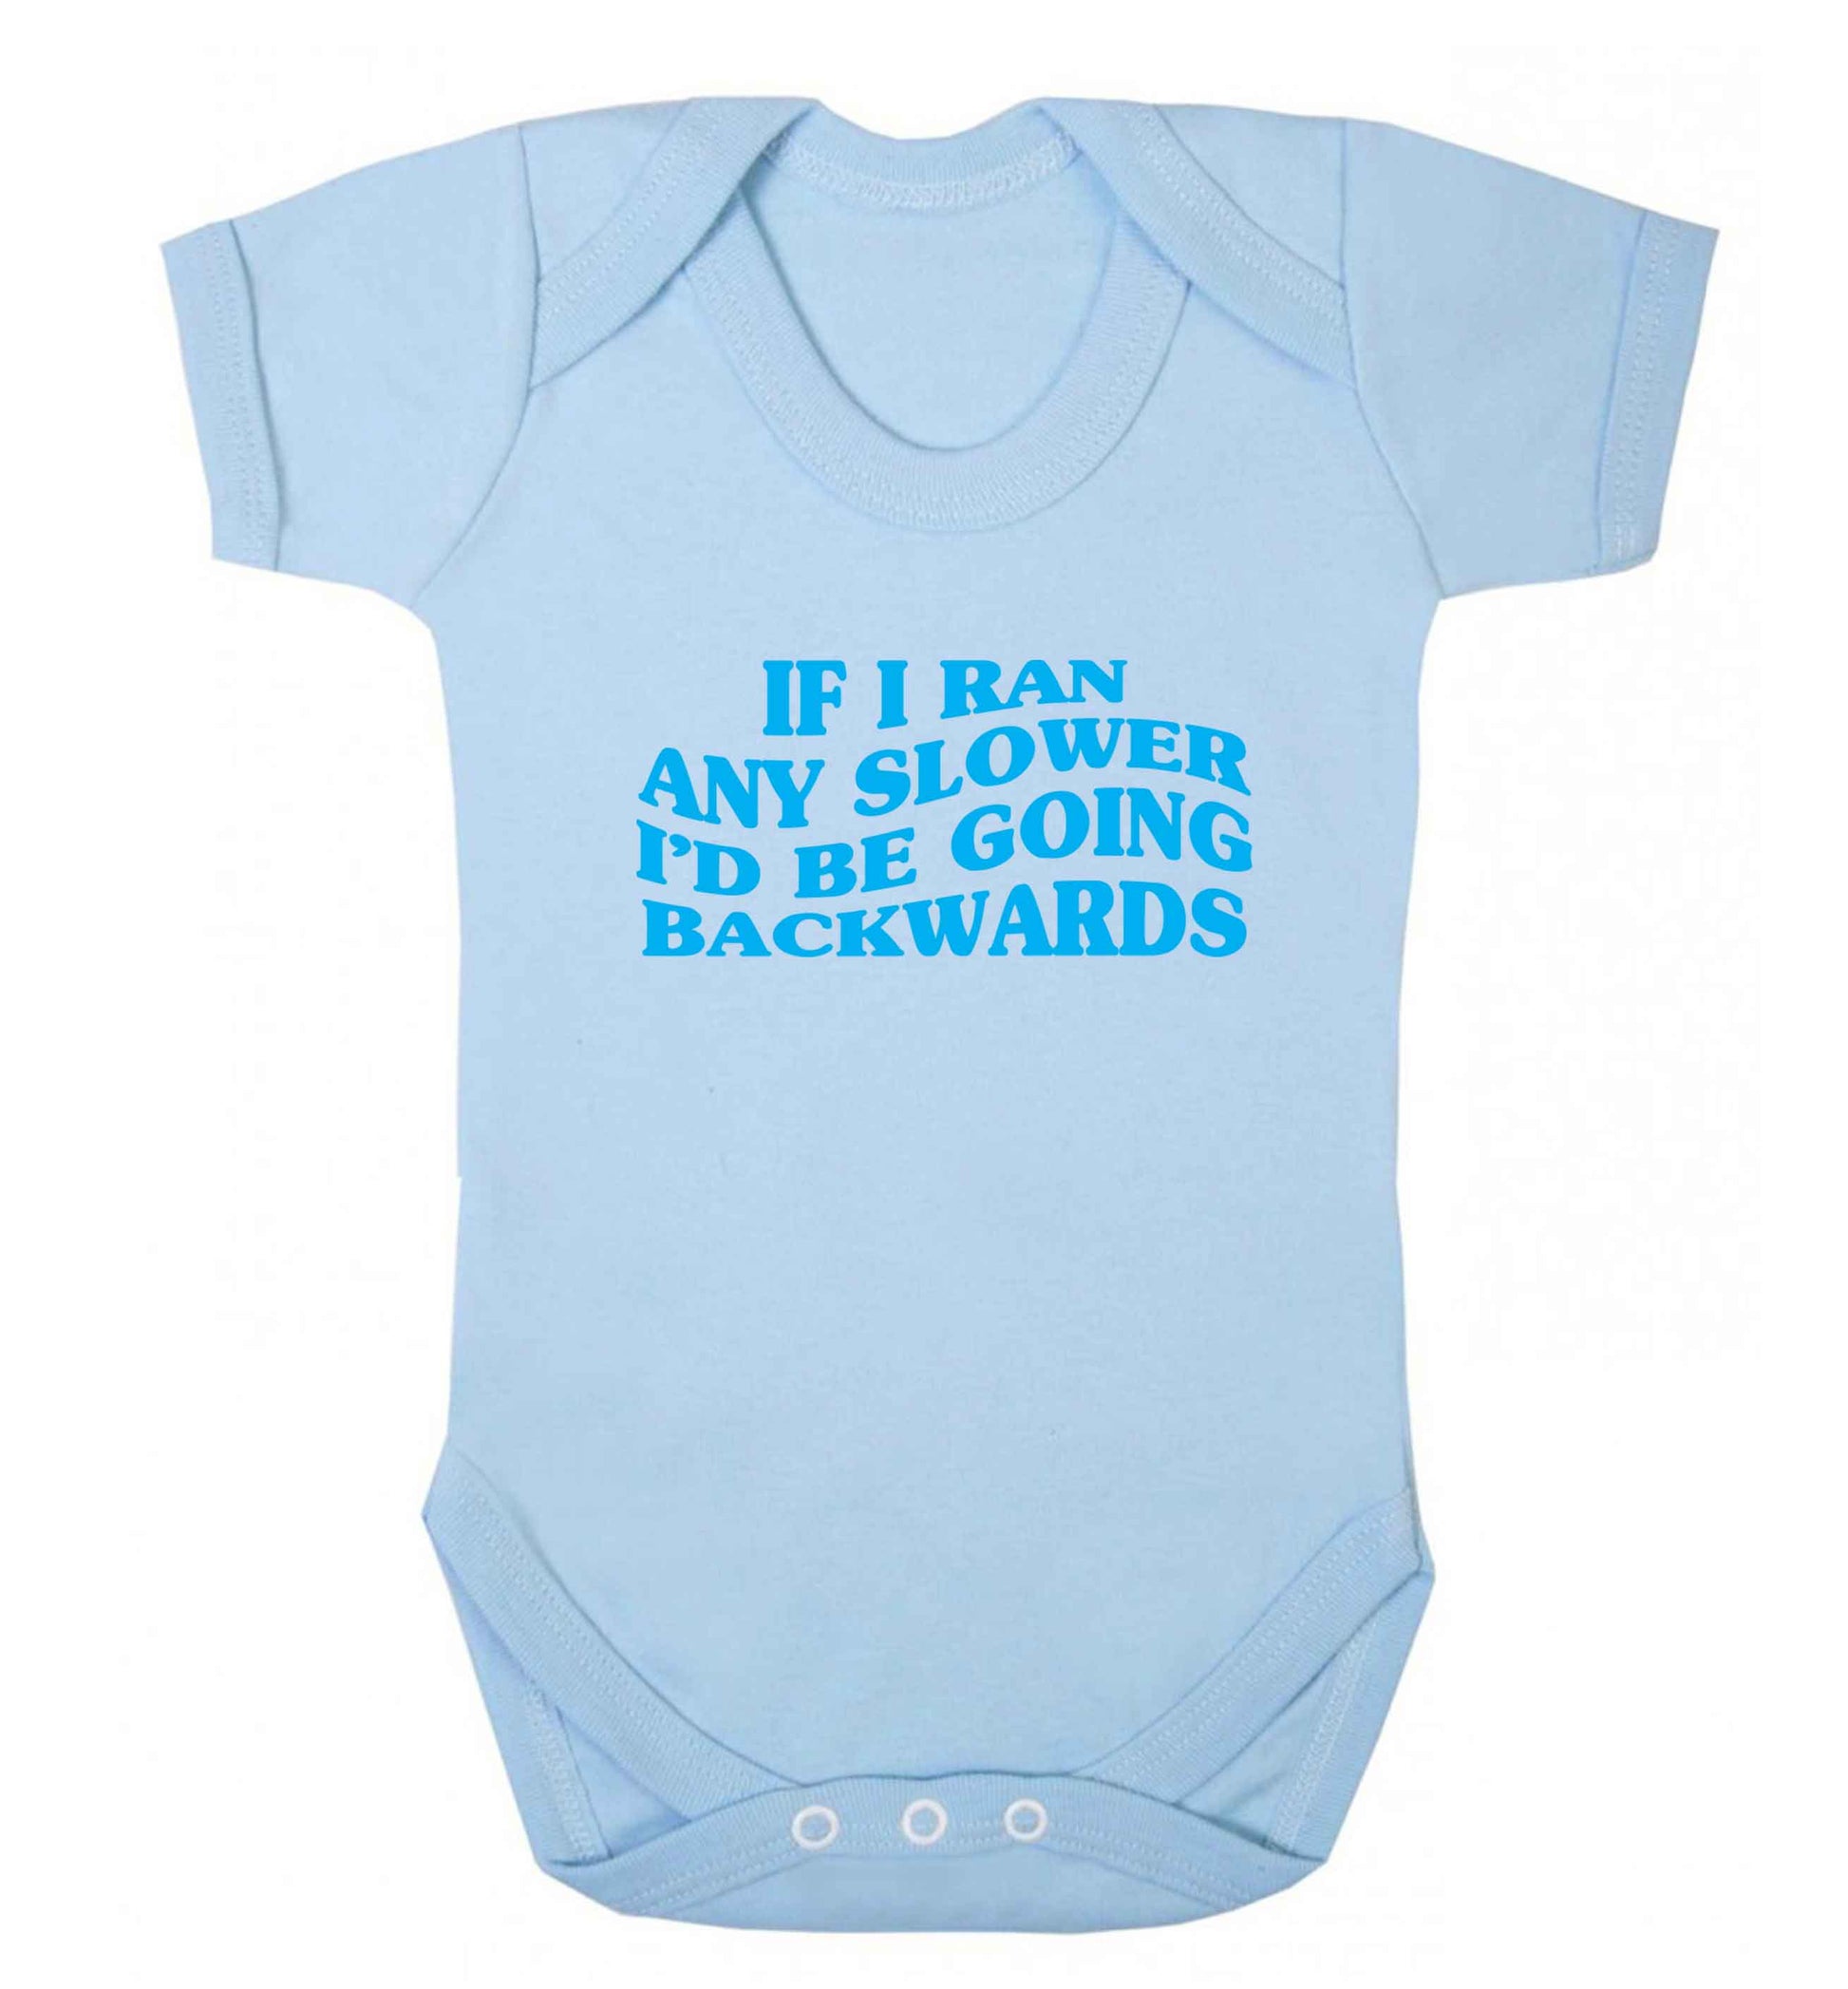 If I ran any slower I'd be going backwards baby vest pale blue 18-24 months